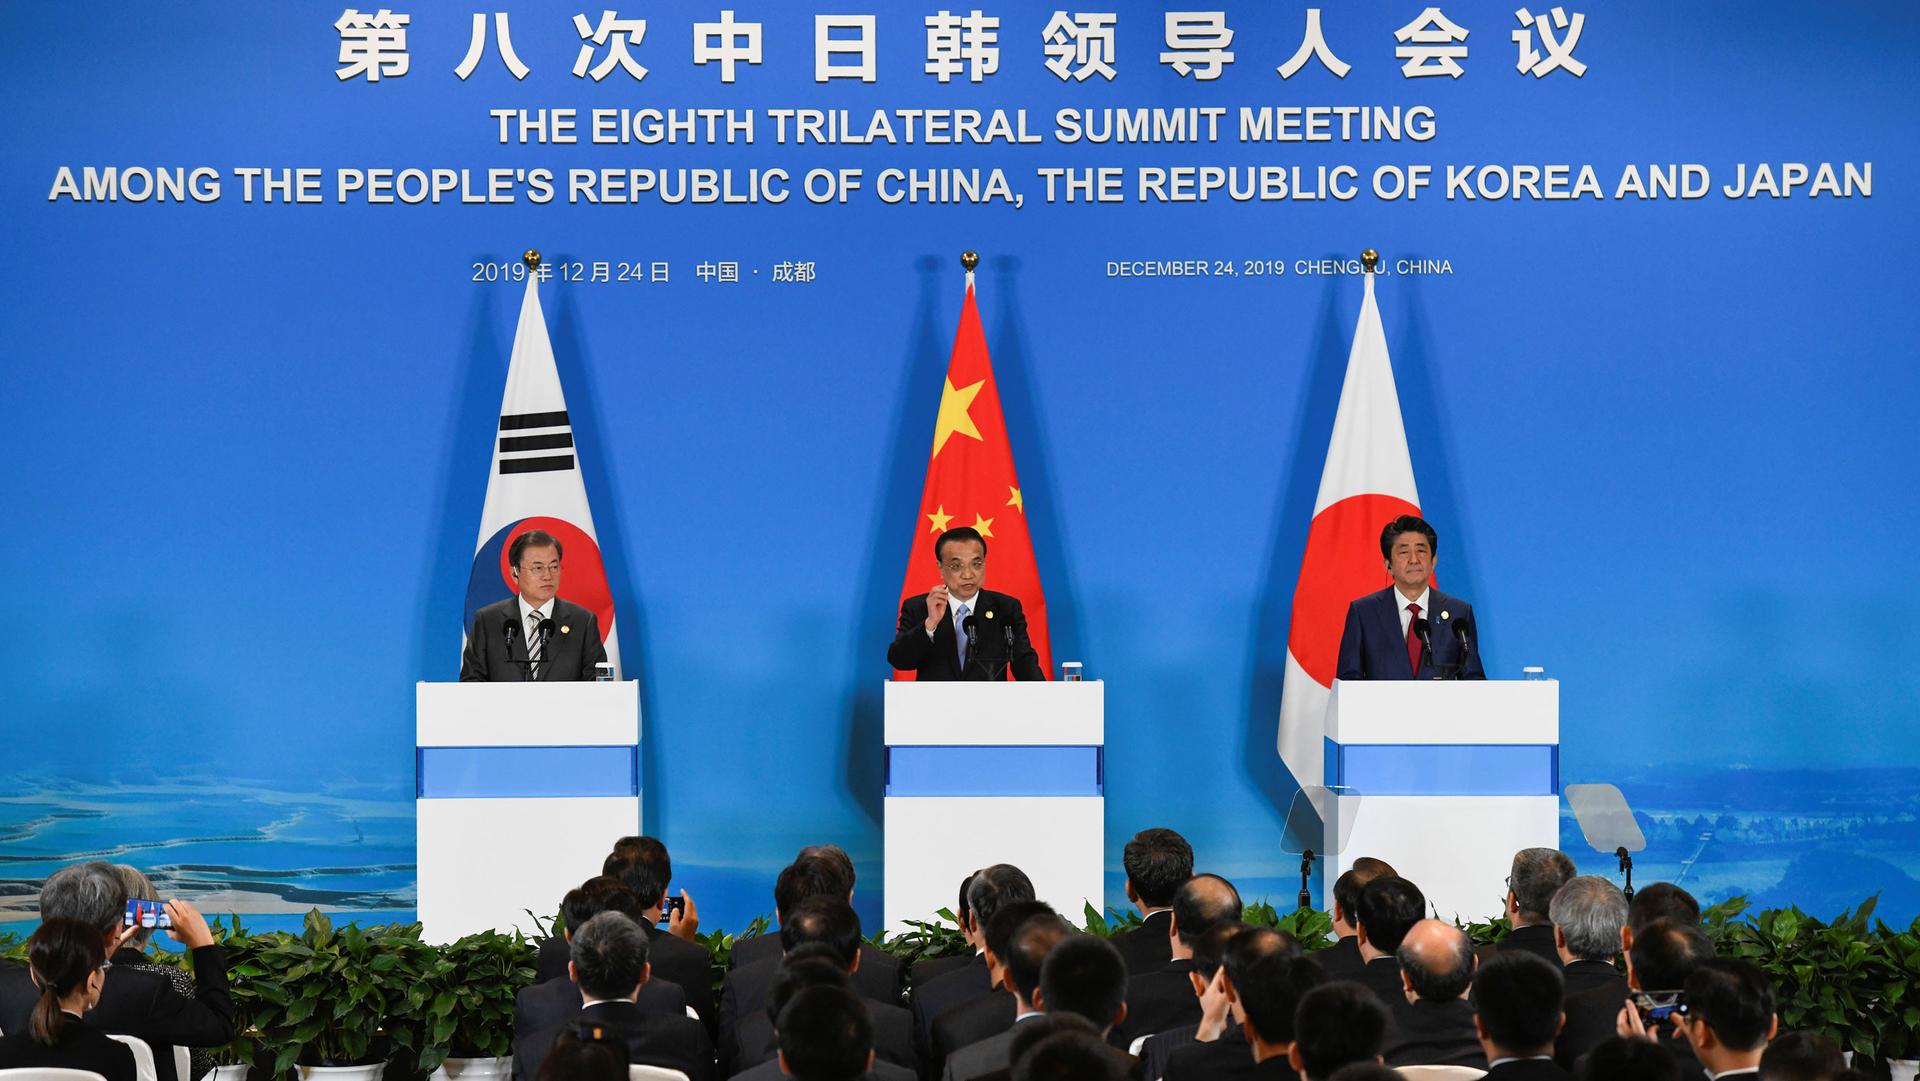 China's Premier Li Keqiang, Japan's Prime Minister Shinzo Abe and South Korea's President Moon Jae-in are shown standing behind three podiums with national flags.